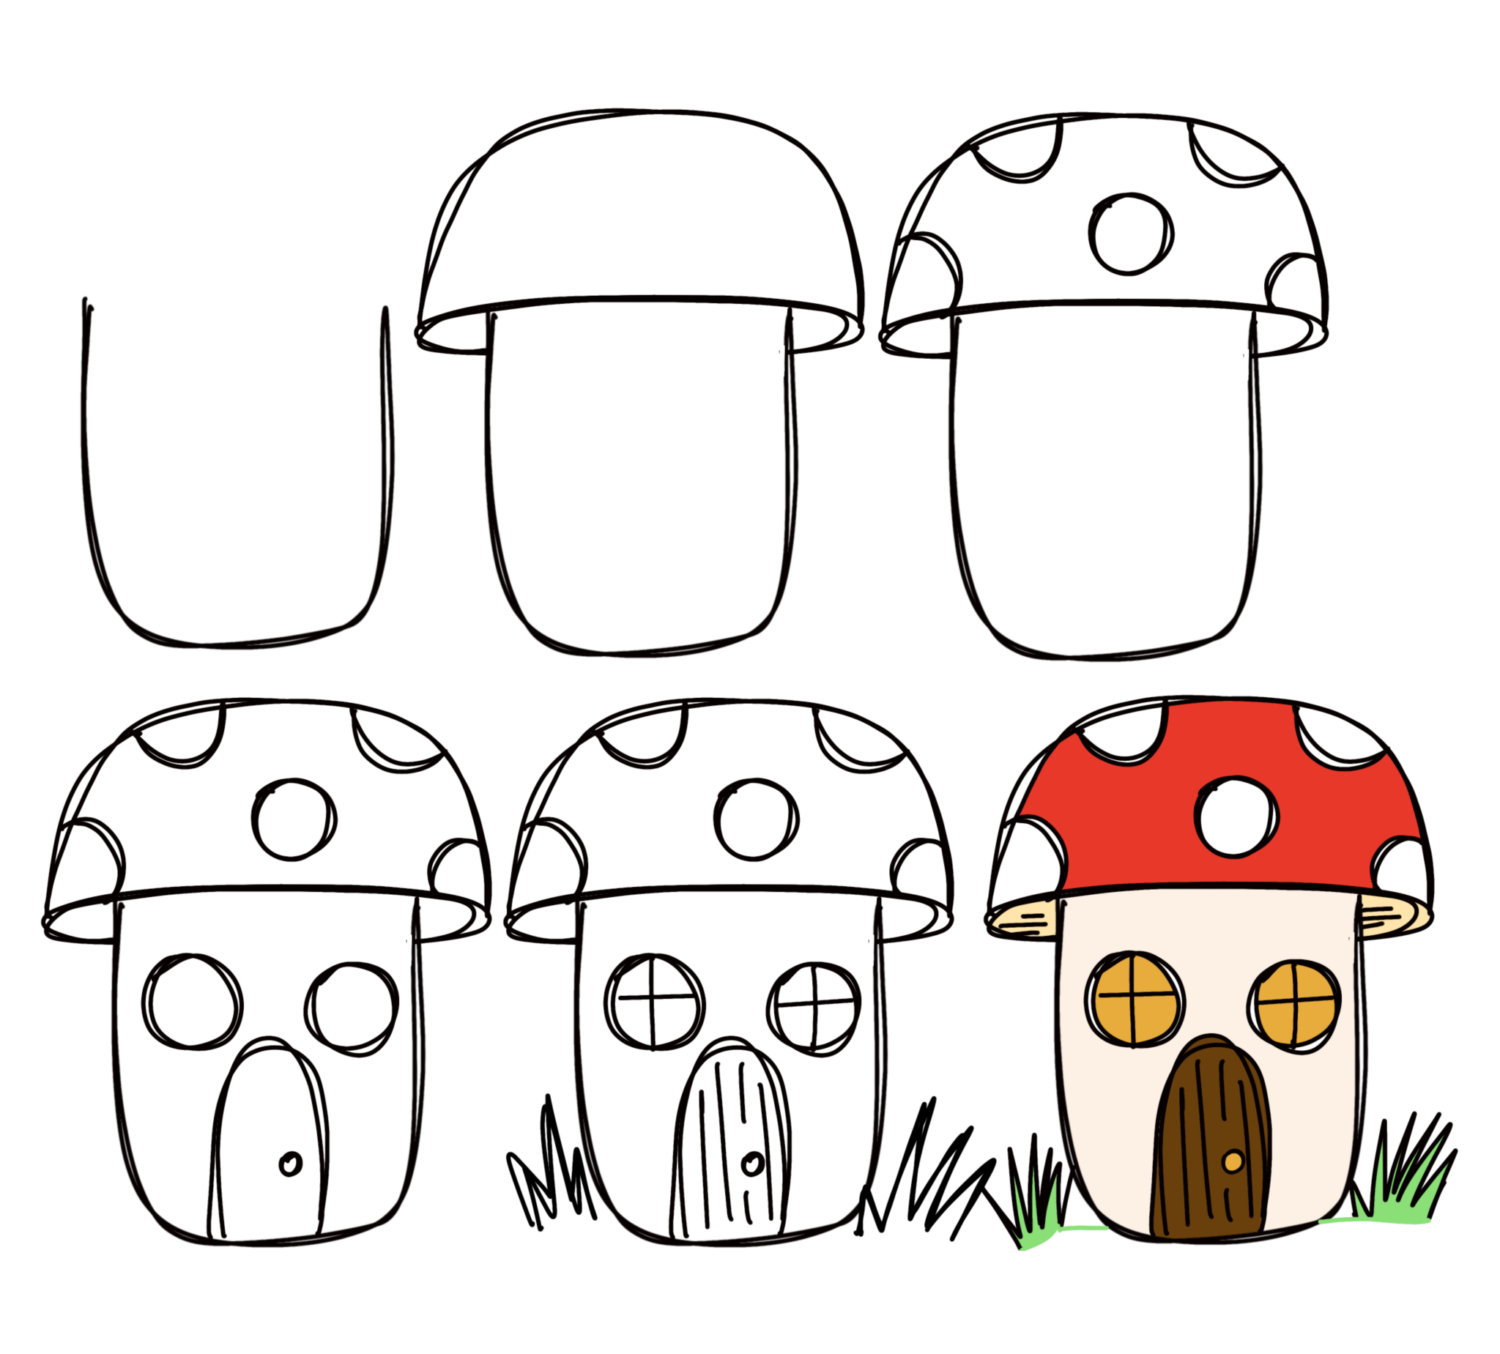 Image is a step by step tutorial for drawing a toadstool house, as described in the written instructions. 